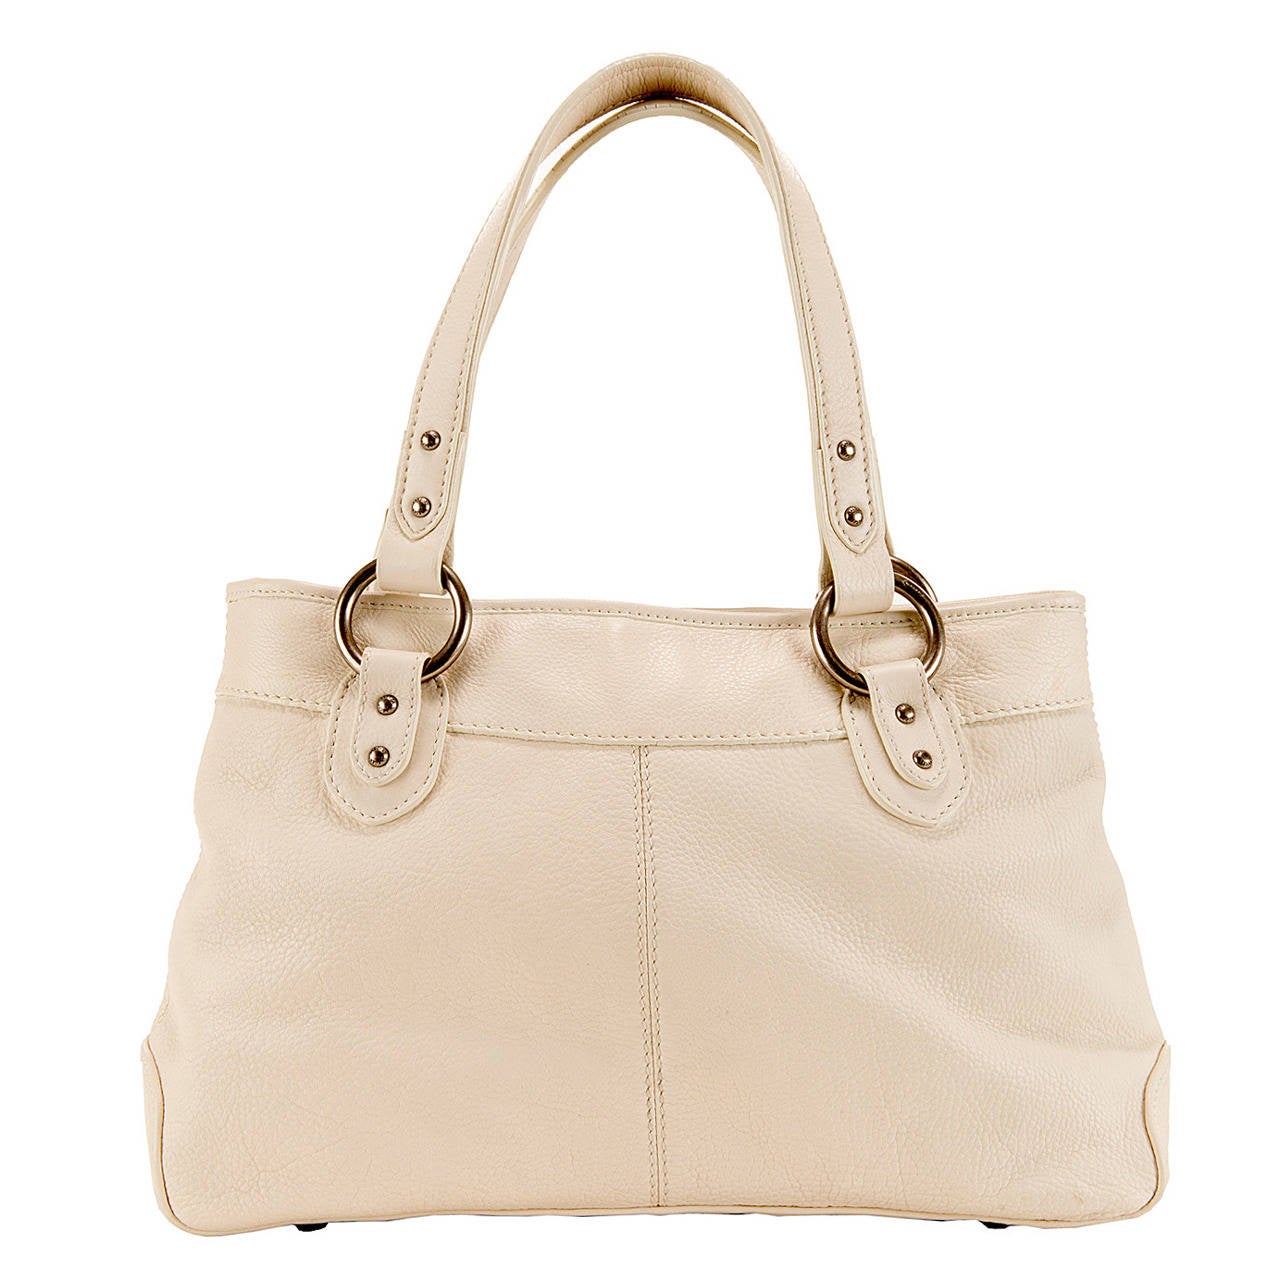  TRES CHIC! Spring/Summer Jaeger of London Large Cream Grained Leather Tote Bag For Sale